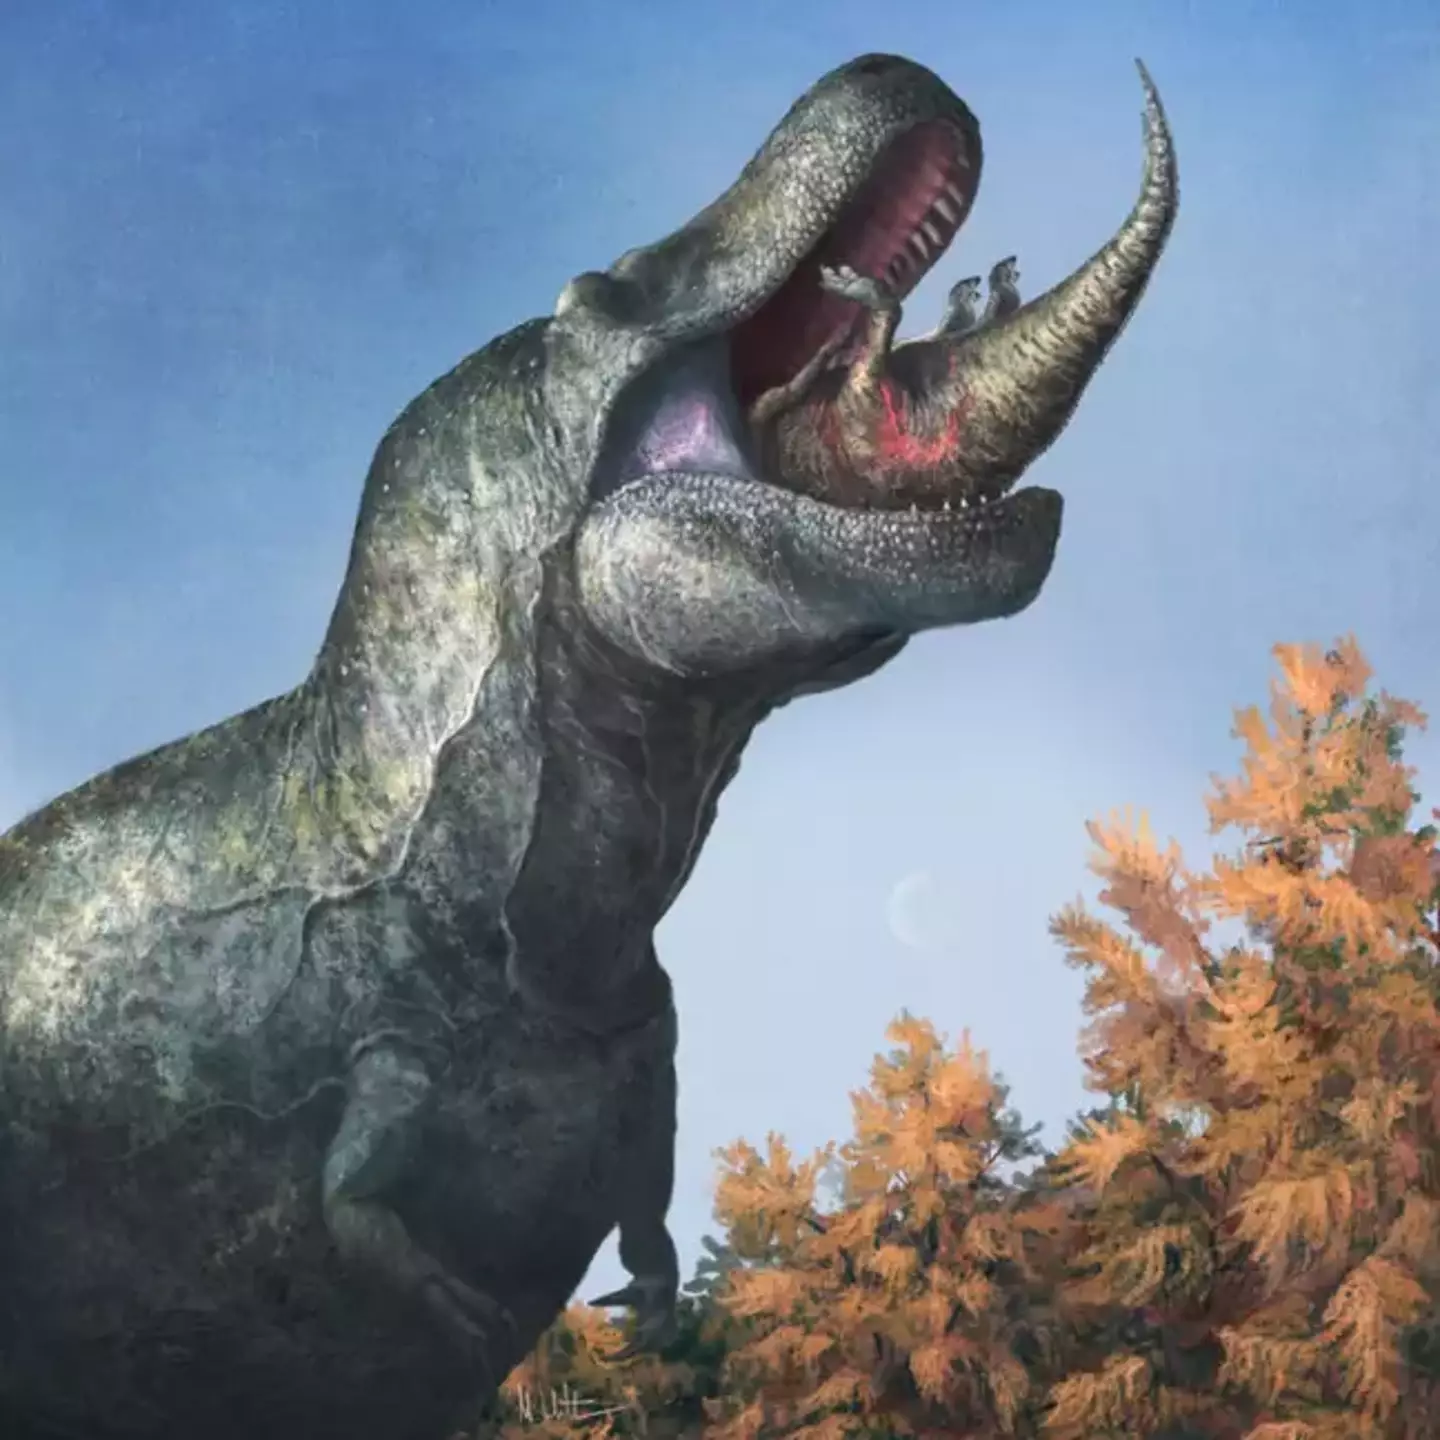 "Sorry for eating you but in 60 million years or so they'll call me the tyrant dinosaur king and I have a reputation to uphold".